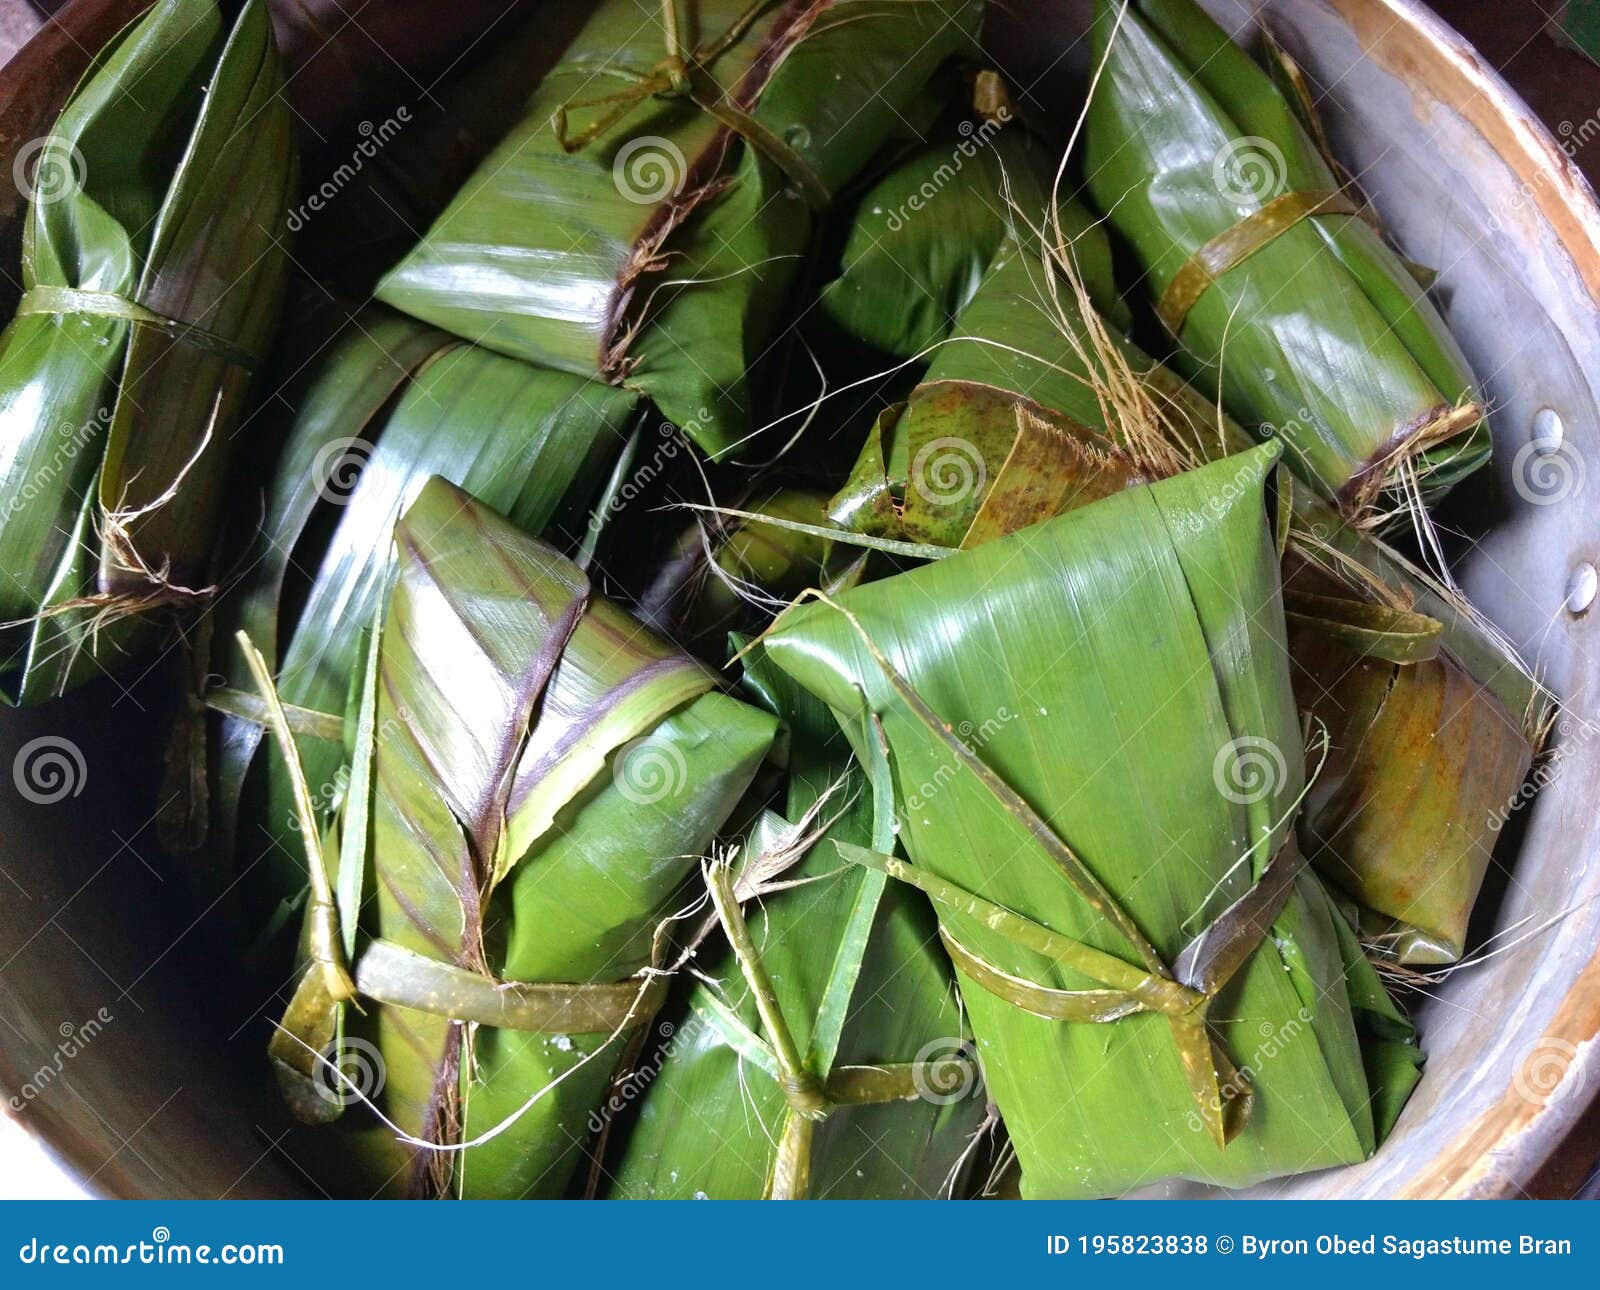 delicious tamales wrapped with banana leaves. typical food of guatemala